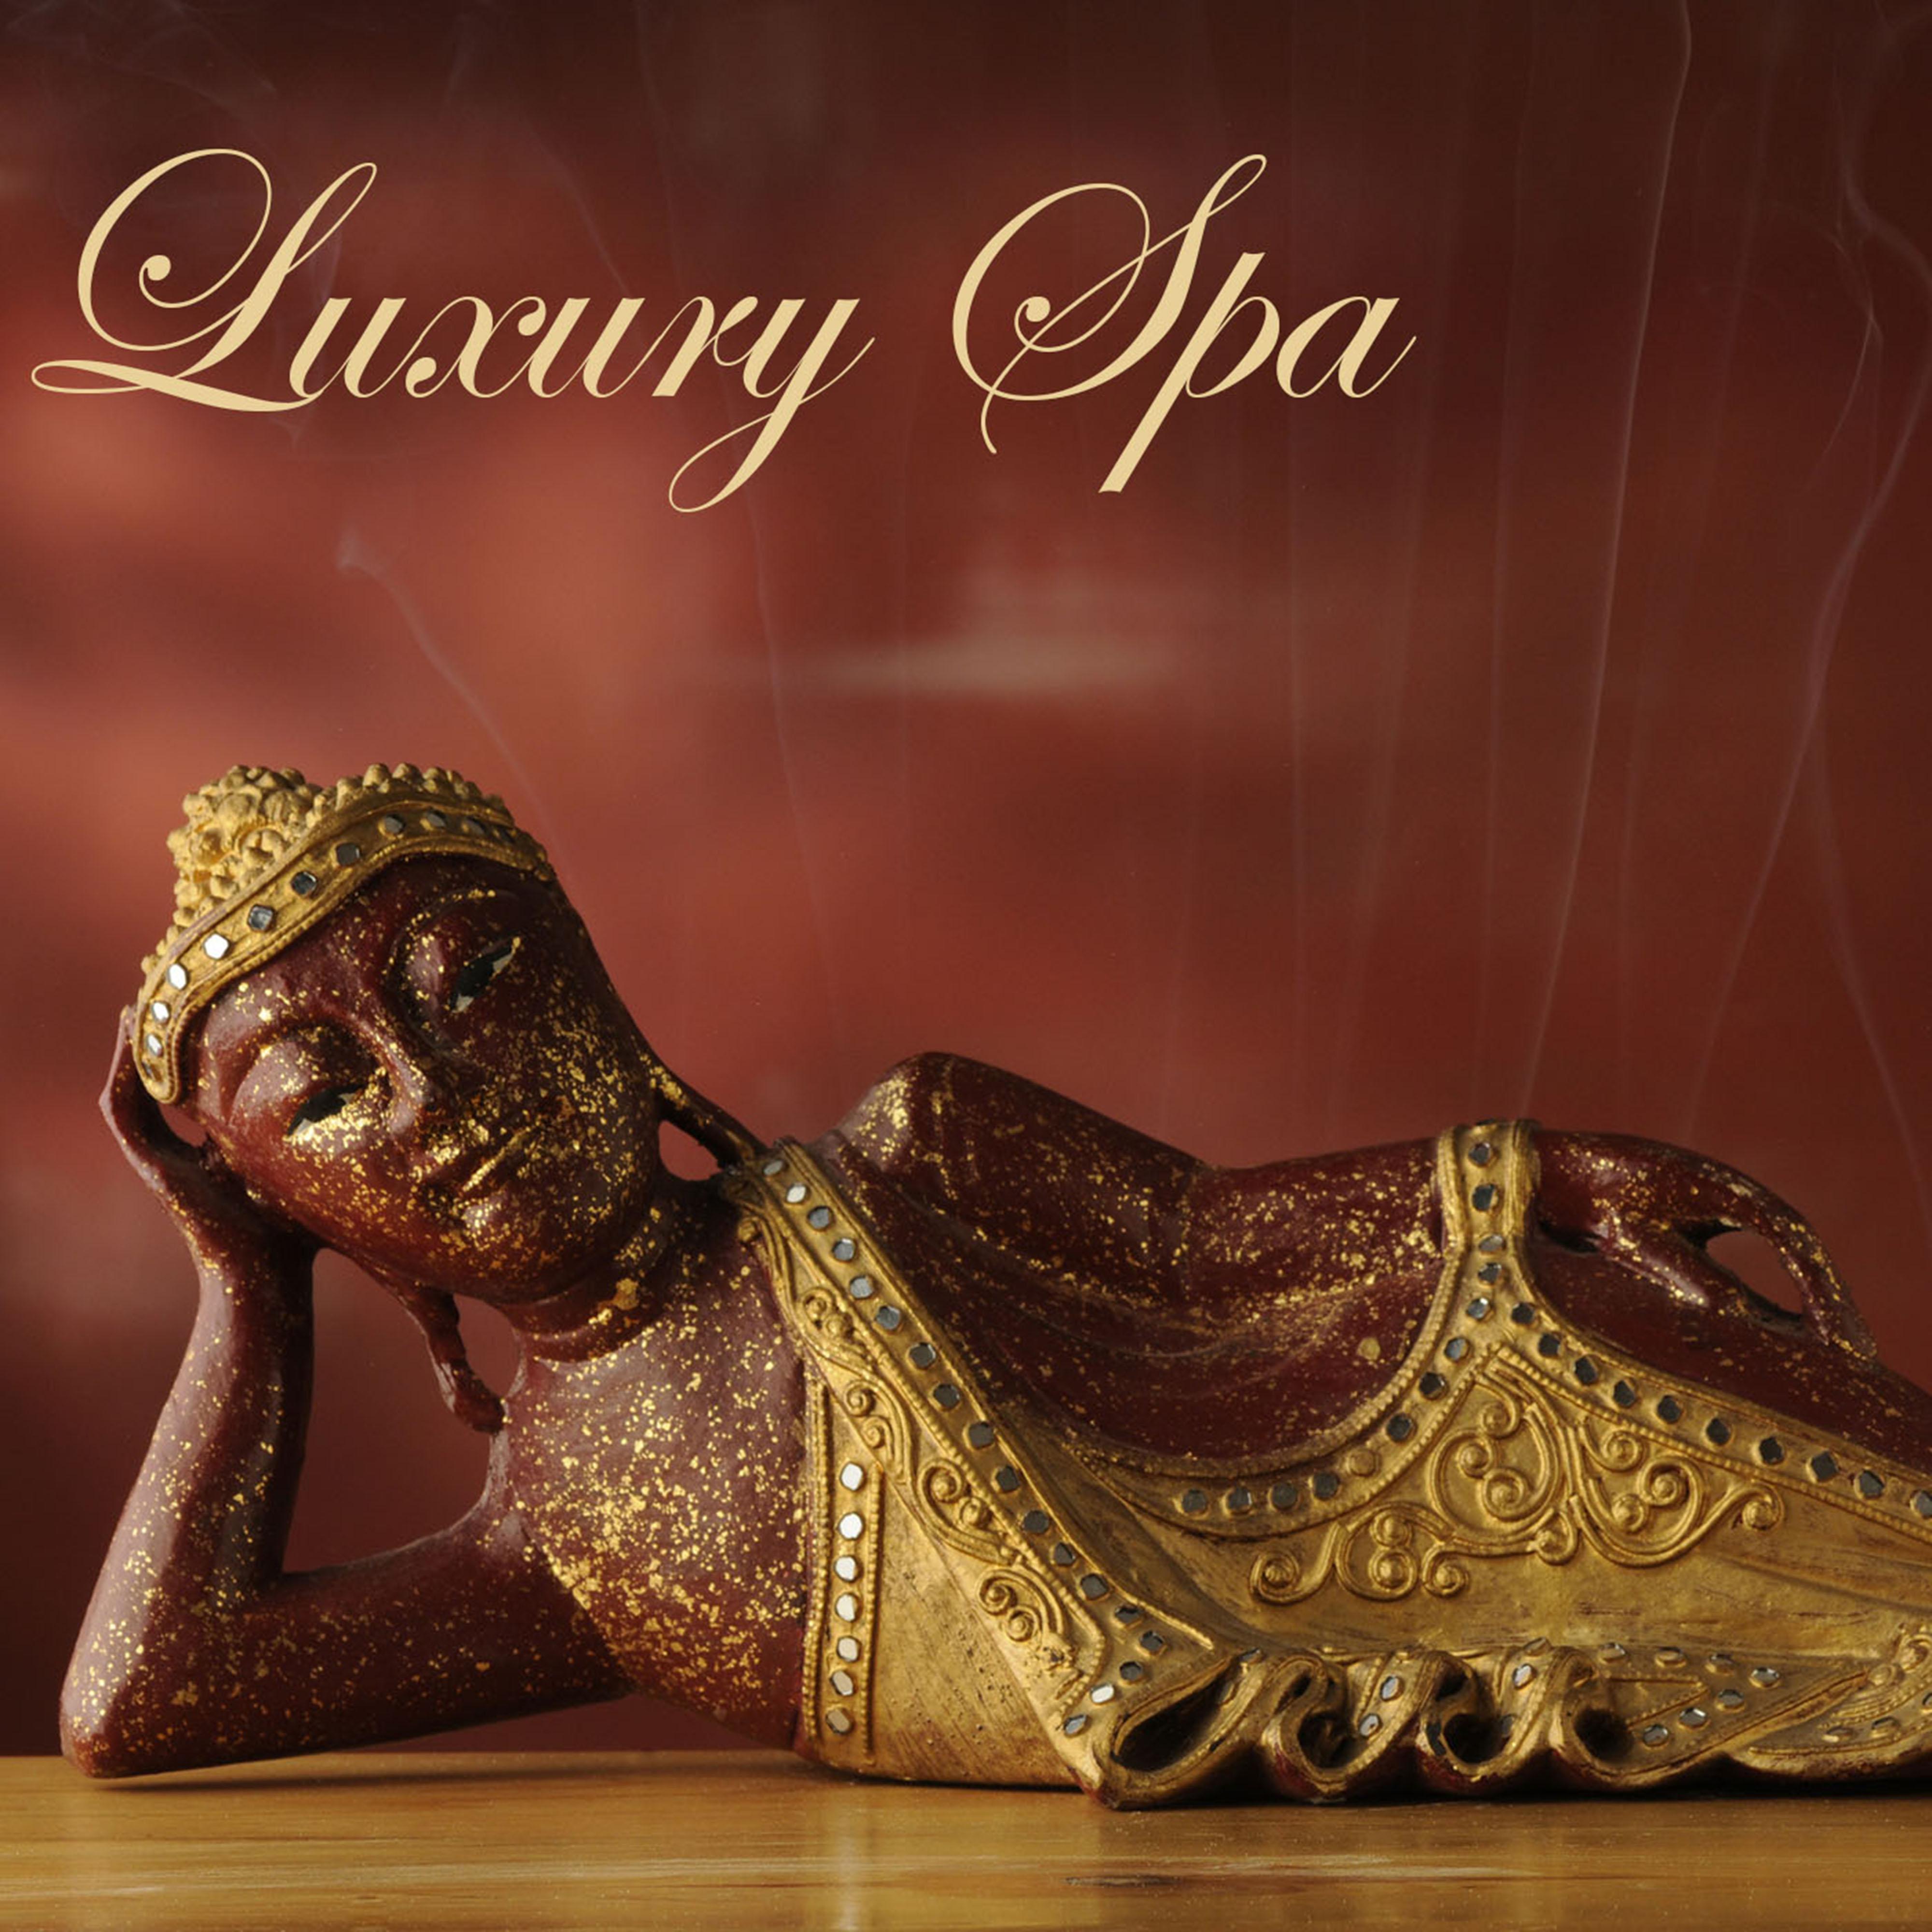 Luxury Spa – Healing Easy Listening Music for Spas, Massage Room in Hotel Spa & Beauty Center